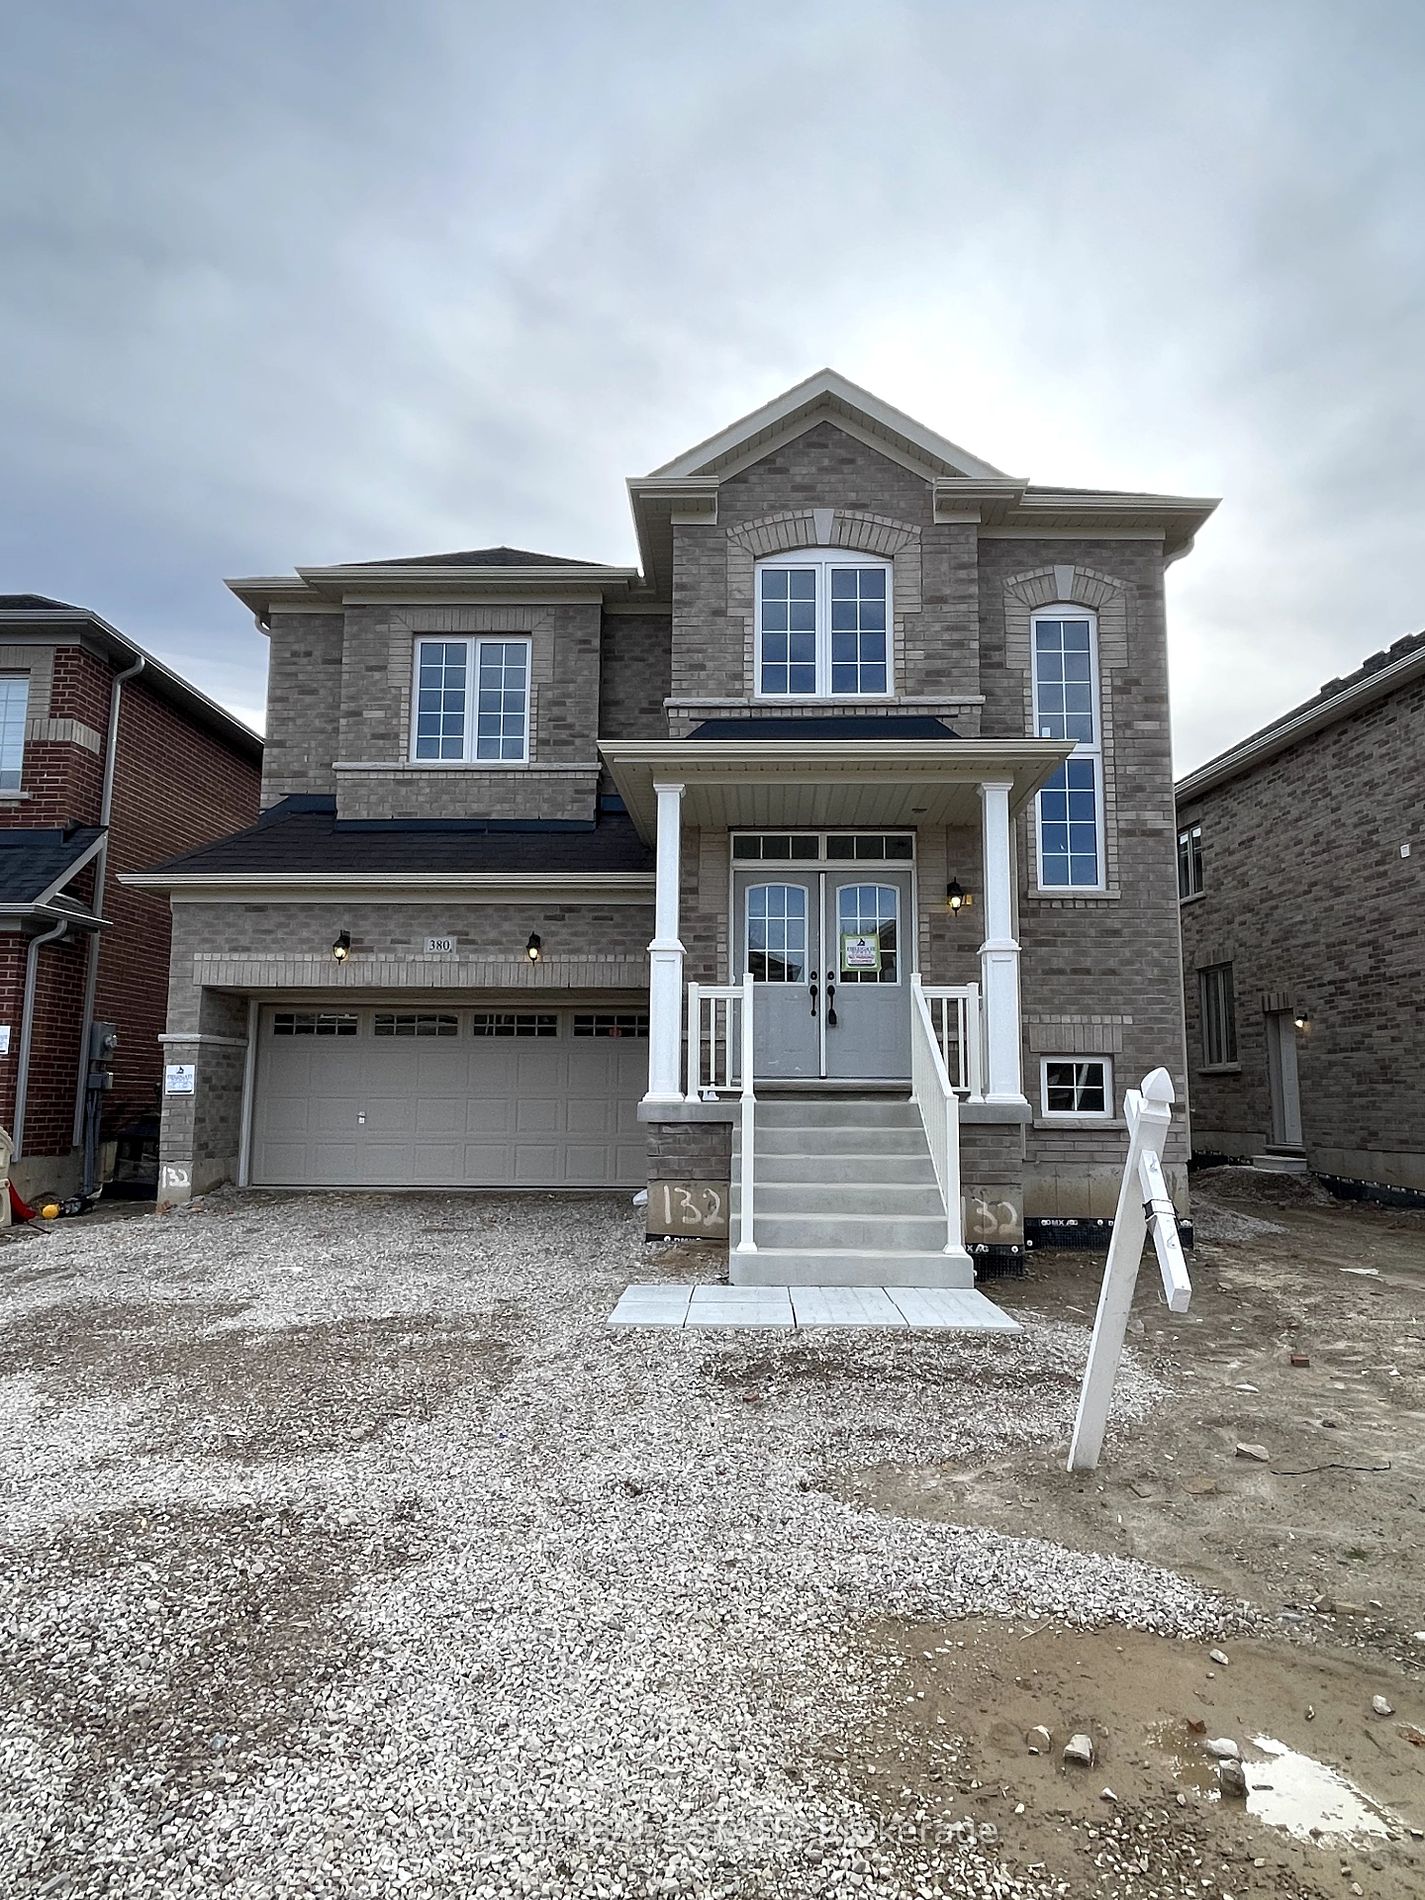 Detached house for sale at 380 Leanne Lane Shelburne Ontario